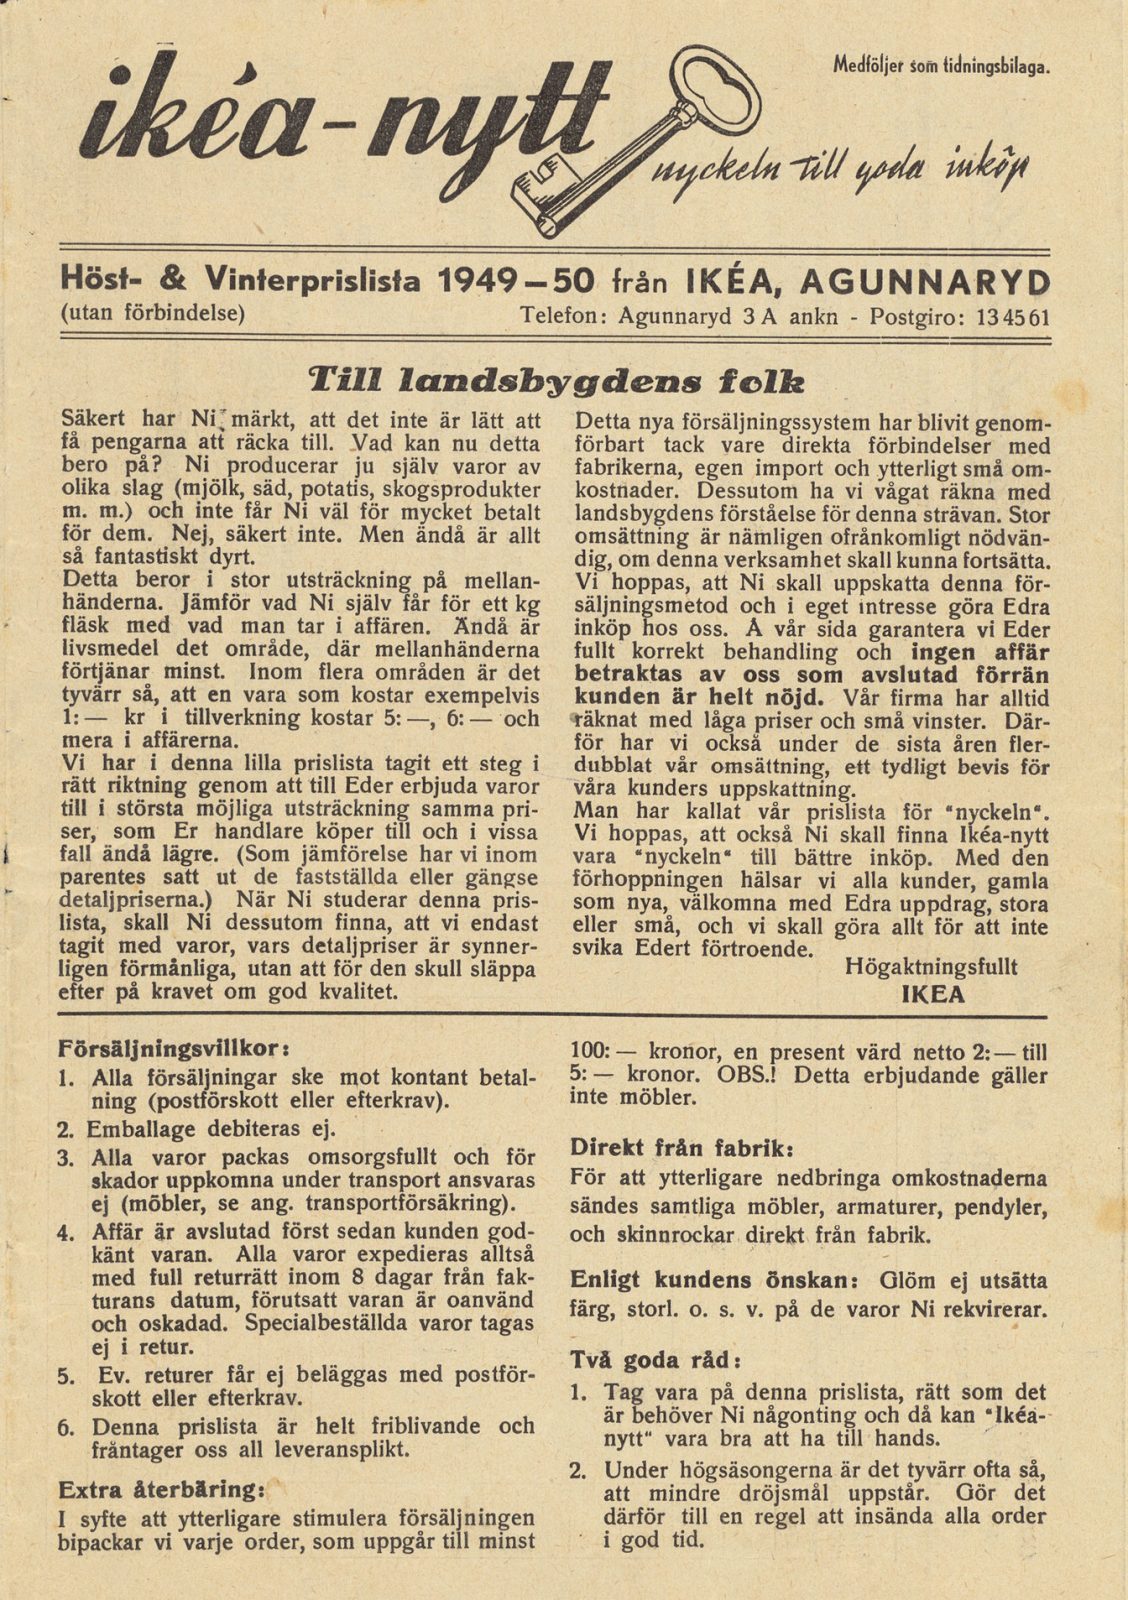 Cover of mail order catalogue ikéa-nytt 1949-50, with a long text headlined 